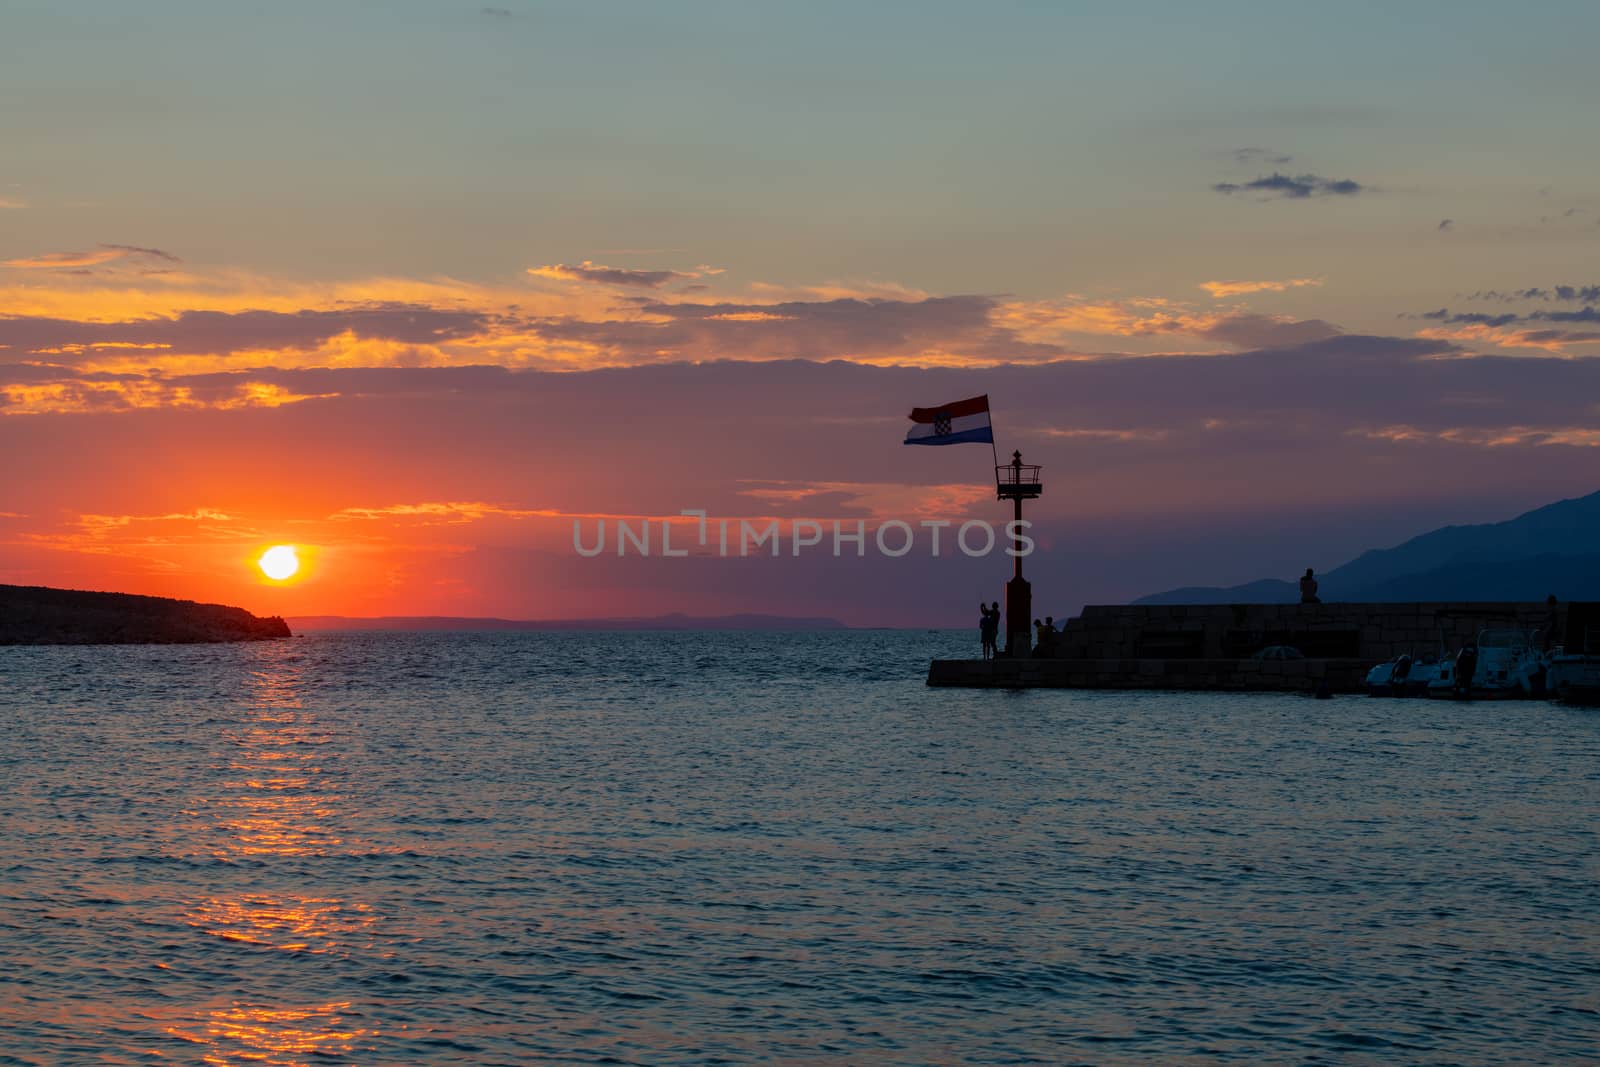 Croatian flag flying in wind at sunset in harbor by asafaric